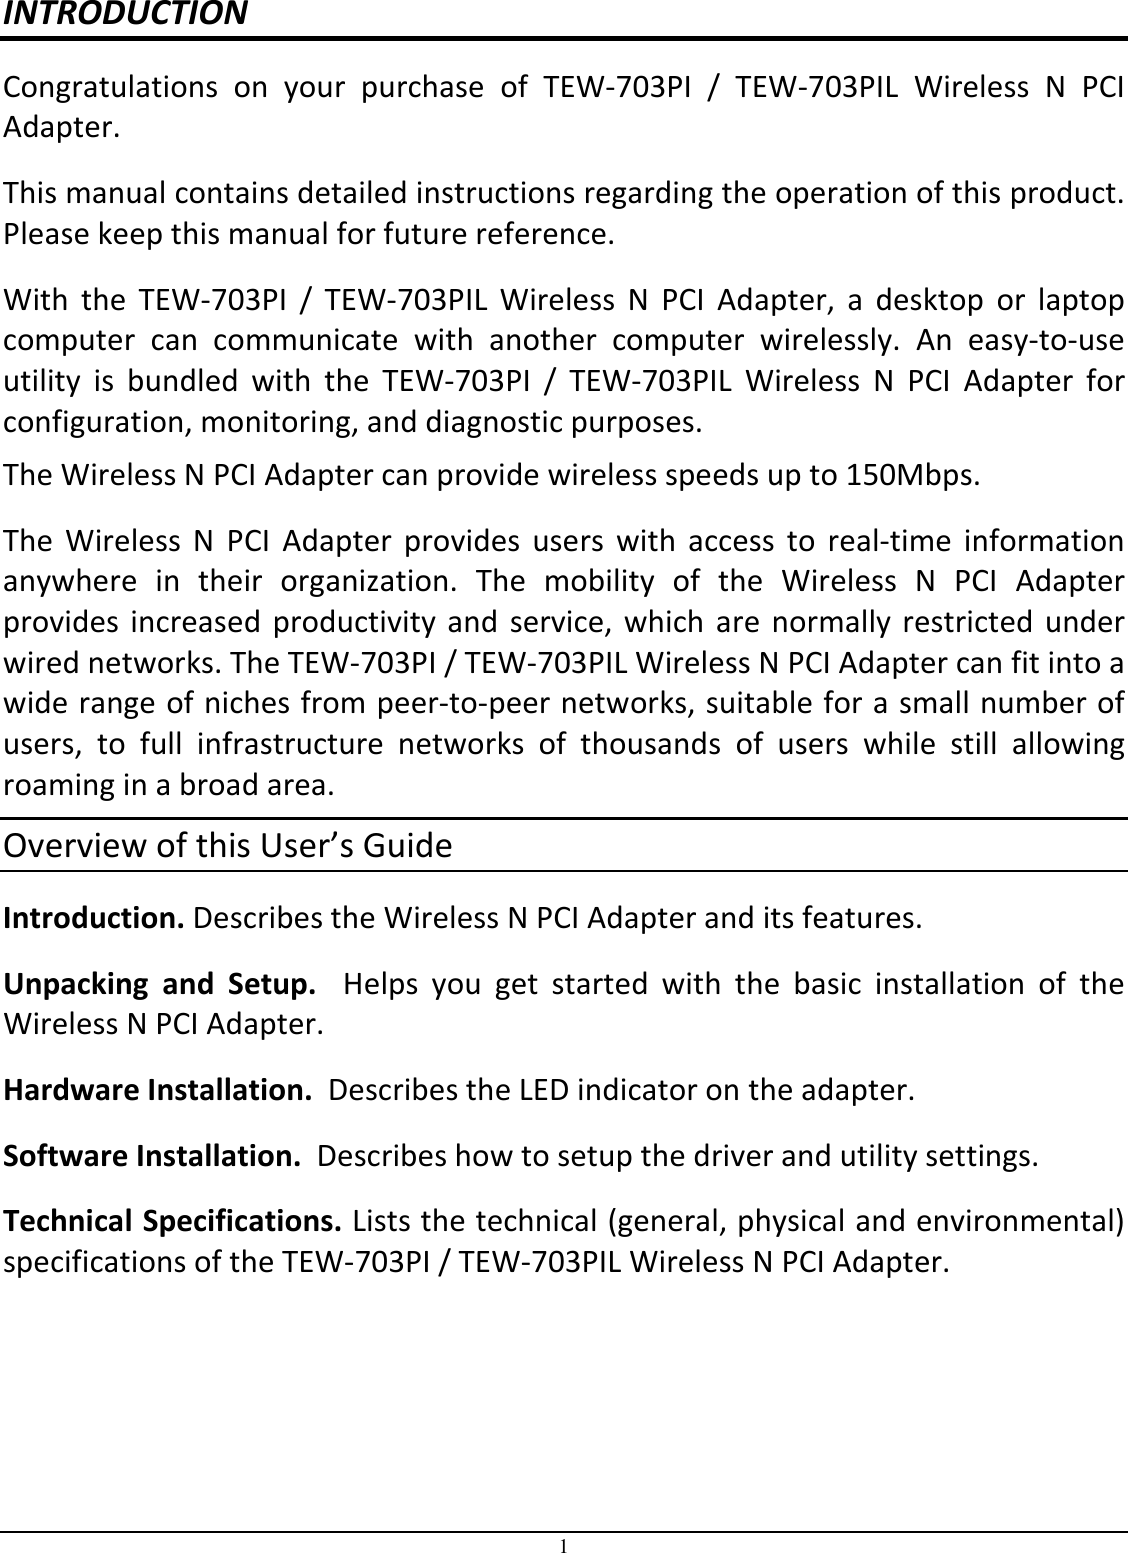 1 INTRODUCTION Congratulations  on  your  purchase  of  TEW-703PI  /  TEW-703PIL  Wireless  N  PCI Adapter. This manual contains detailed instructions regarding the operation of this product. Please keep this manual for future reference. With  the  TEW-703PI  /  TEW-703PIL  Wireless  N  PCI  Adapter,  a  desktop  or  laptop computer  can  communicate  with  another  computer  wirelessly.  An  easy-to-use utility  is  bundled  with  the  TEW-703PI  /  TEW-703PIL  Wireless  N  PCI  Adapter  for configuration, monitoring, and diagnostic purposes.  The Wireless N PCI Adapter can provide wireless speeds up to 150Mbps. The  Wireless  N  PCI  Adapter  provides  users  with  access  to  real-time  information anywhere  in  their  organization.  The  mobility  of  the  Wireless  N  PCI  Adapter provides  increased  productivity  and  service,  which  are  normally  restricted  under wired networks. The TEW-703PI / TEW-703PIL Wireless N PCI Adapter can fit into a wide range of niches from peer-to-peer networks, suitable for a small number of users,  to  full  infrastructure  networks  of  thousands  of  users  while  still  allowing roaming in a broad area.  Overview of this User’s Guide Introduction. Describes the Wireless N PCI Adapter and its features. Unpacking  and  Setup.    Helps  you  get  started  with  the  basic  installation  of  the Wireless N PCI Adapter. Hardware Installation.  Describes the LED indicator on the adapter. Software Installation.  Describes how to setup the driver and utility settings. Technical Specifications. Lists the technical (general, physical and environmental) specifications of the TEW-703PI / TEW-703PIL Wireless N PCI Adapter. 